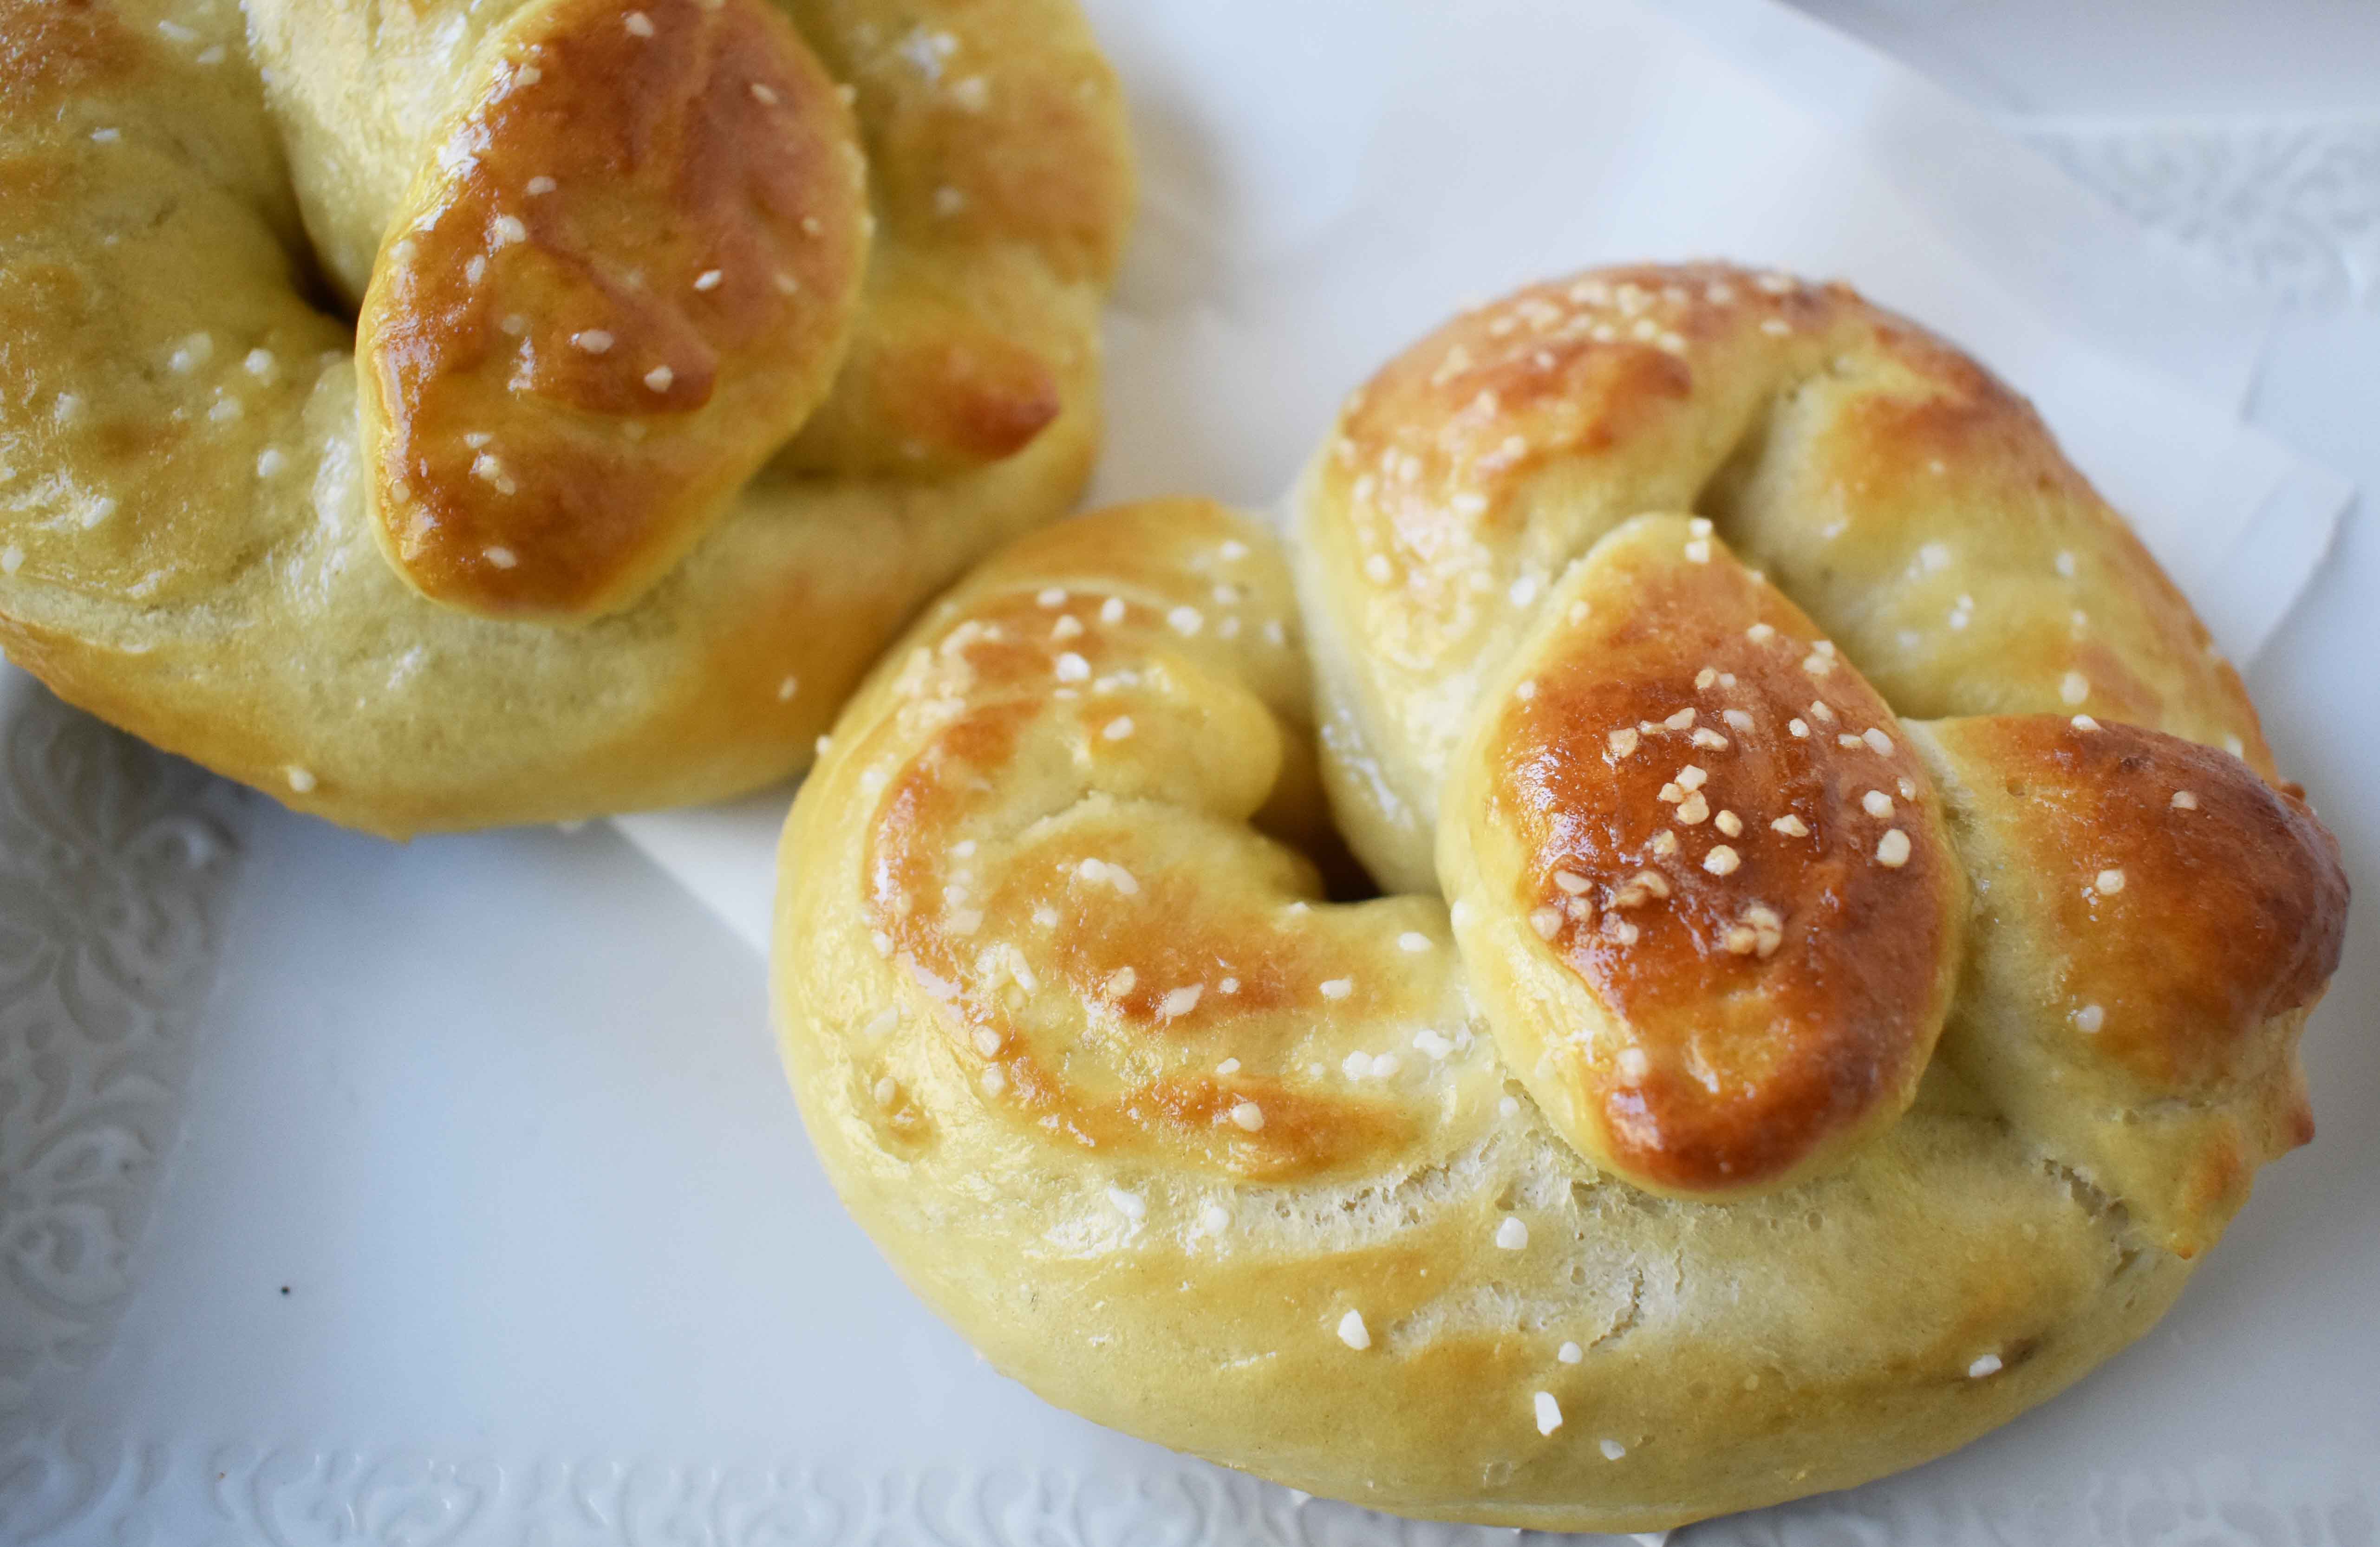 Buttery Soft Pretzels. Homemade, made from scratch soft pretzels. Buttery, soft, and fluffy pretzels with melted butter and coarse salt. Super easy to make! www.modernhoney.com